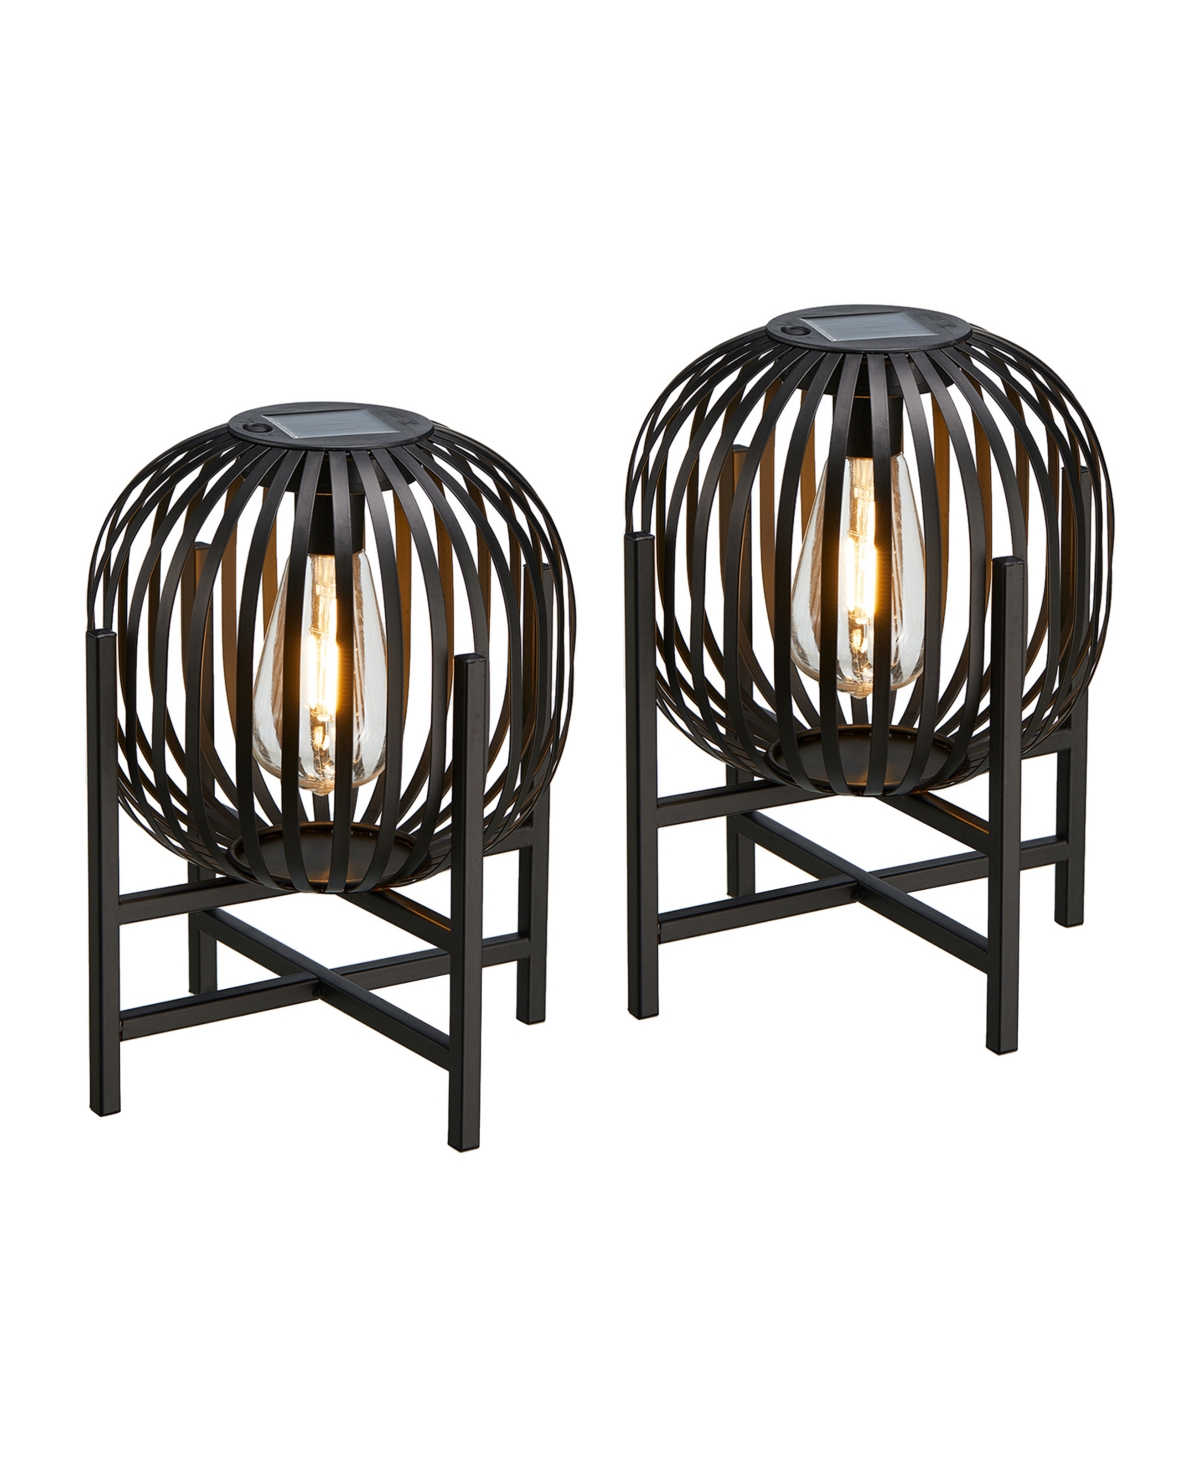 11.50" H Set of 2 Black Metal Stripes Solar Powered Edison Bulb Outdoor Lantern with Stand - Black